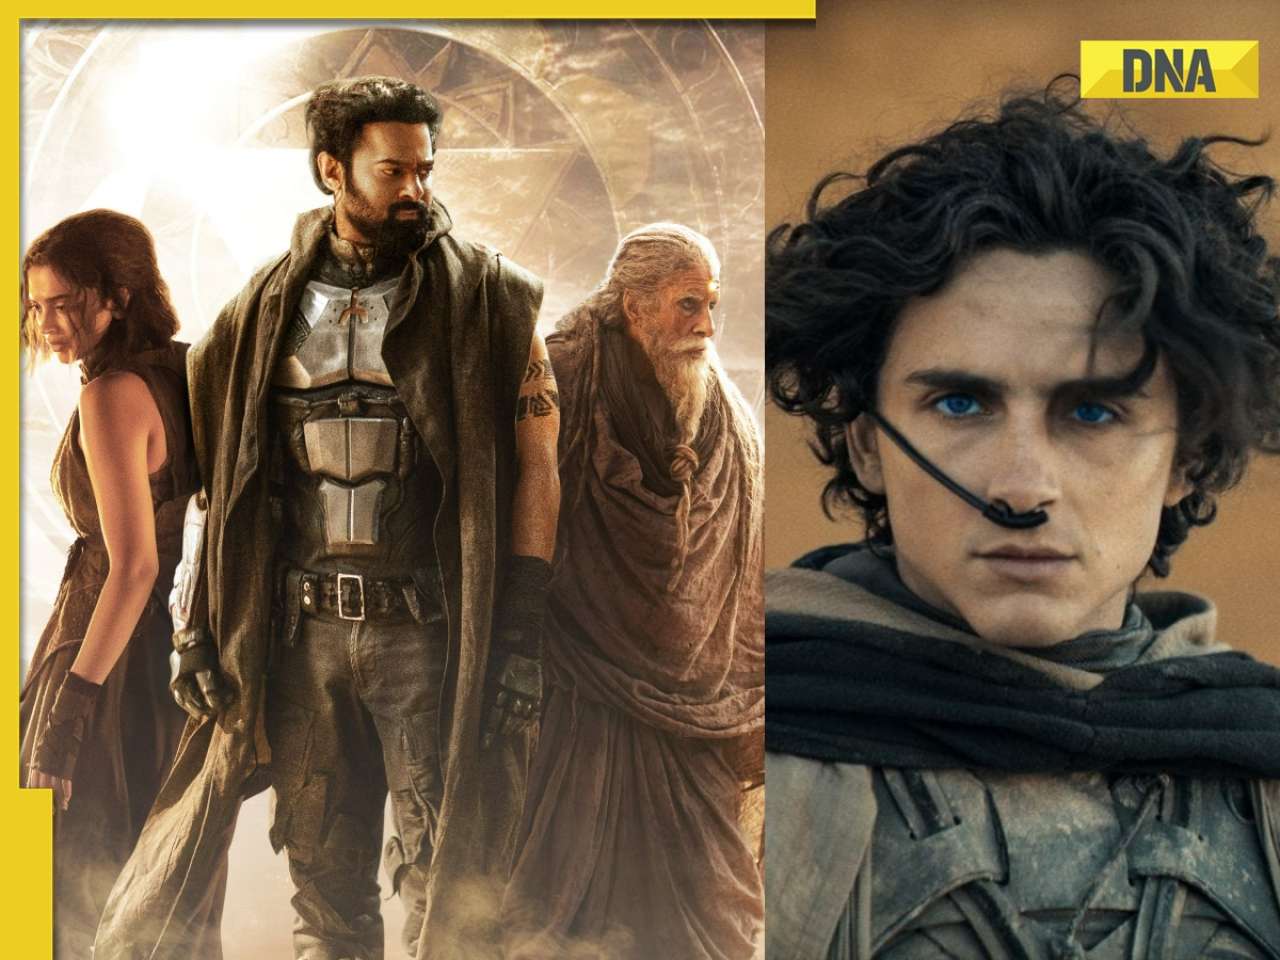 Kalki 2898 AD director Nag Ashwin reacts to Prabhas-starrer being compared with Dune: 'Wherever there is...'